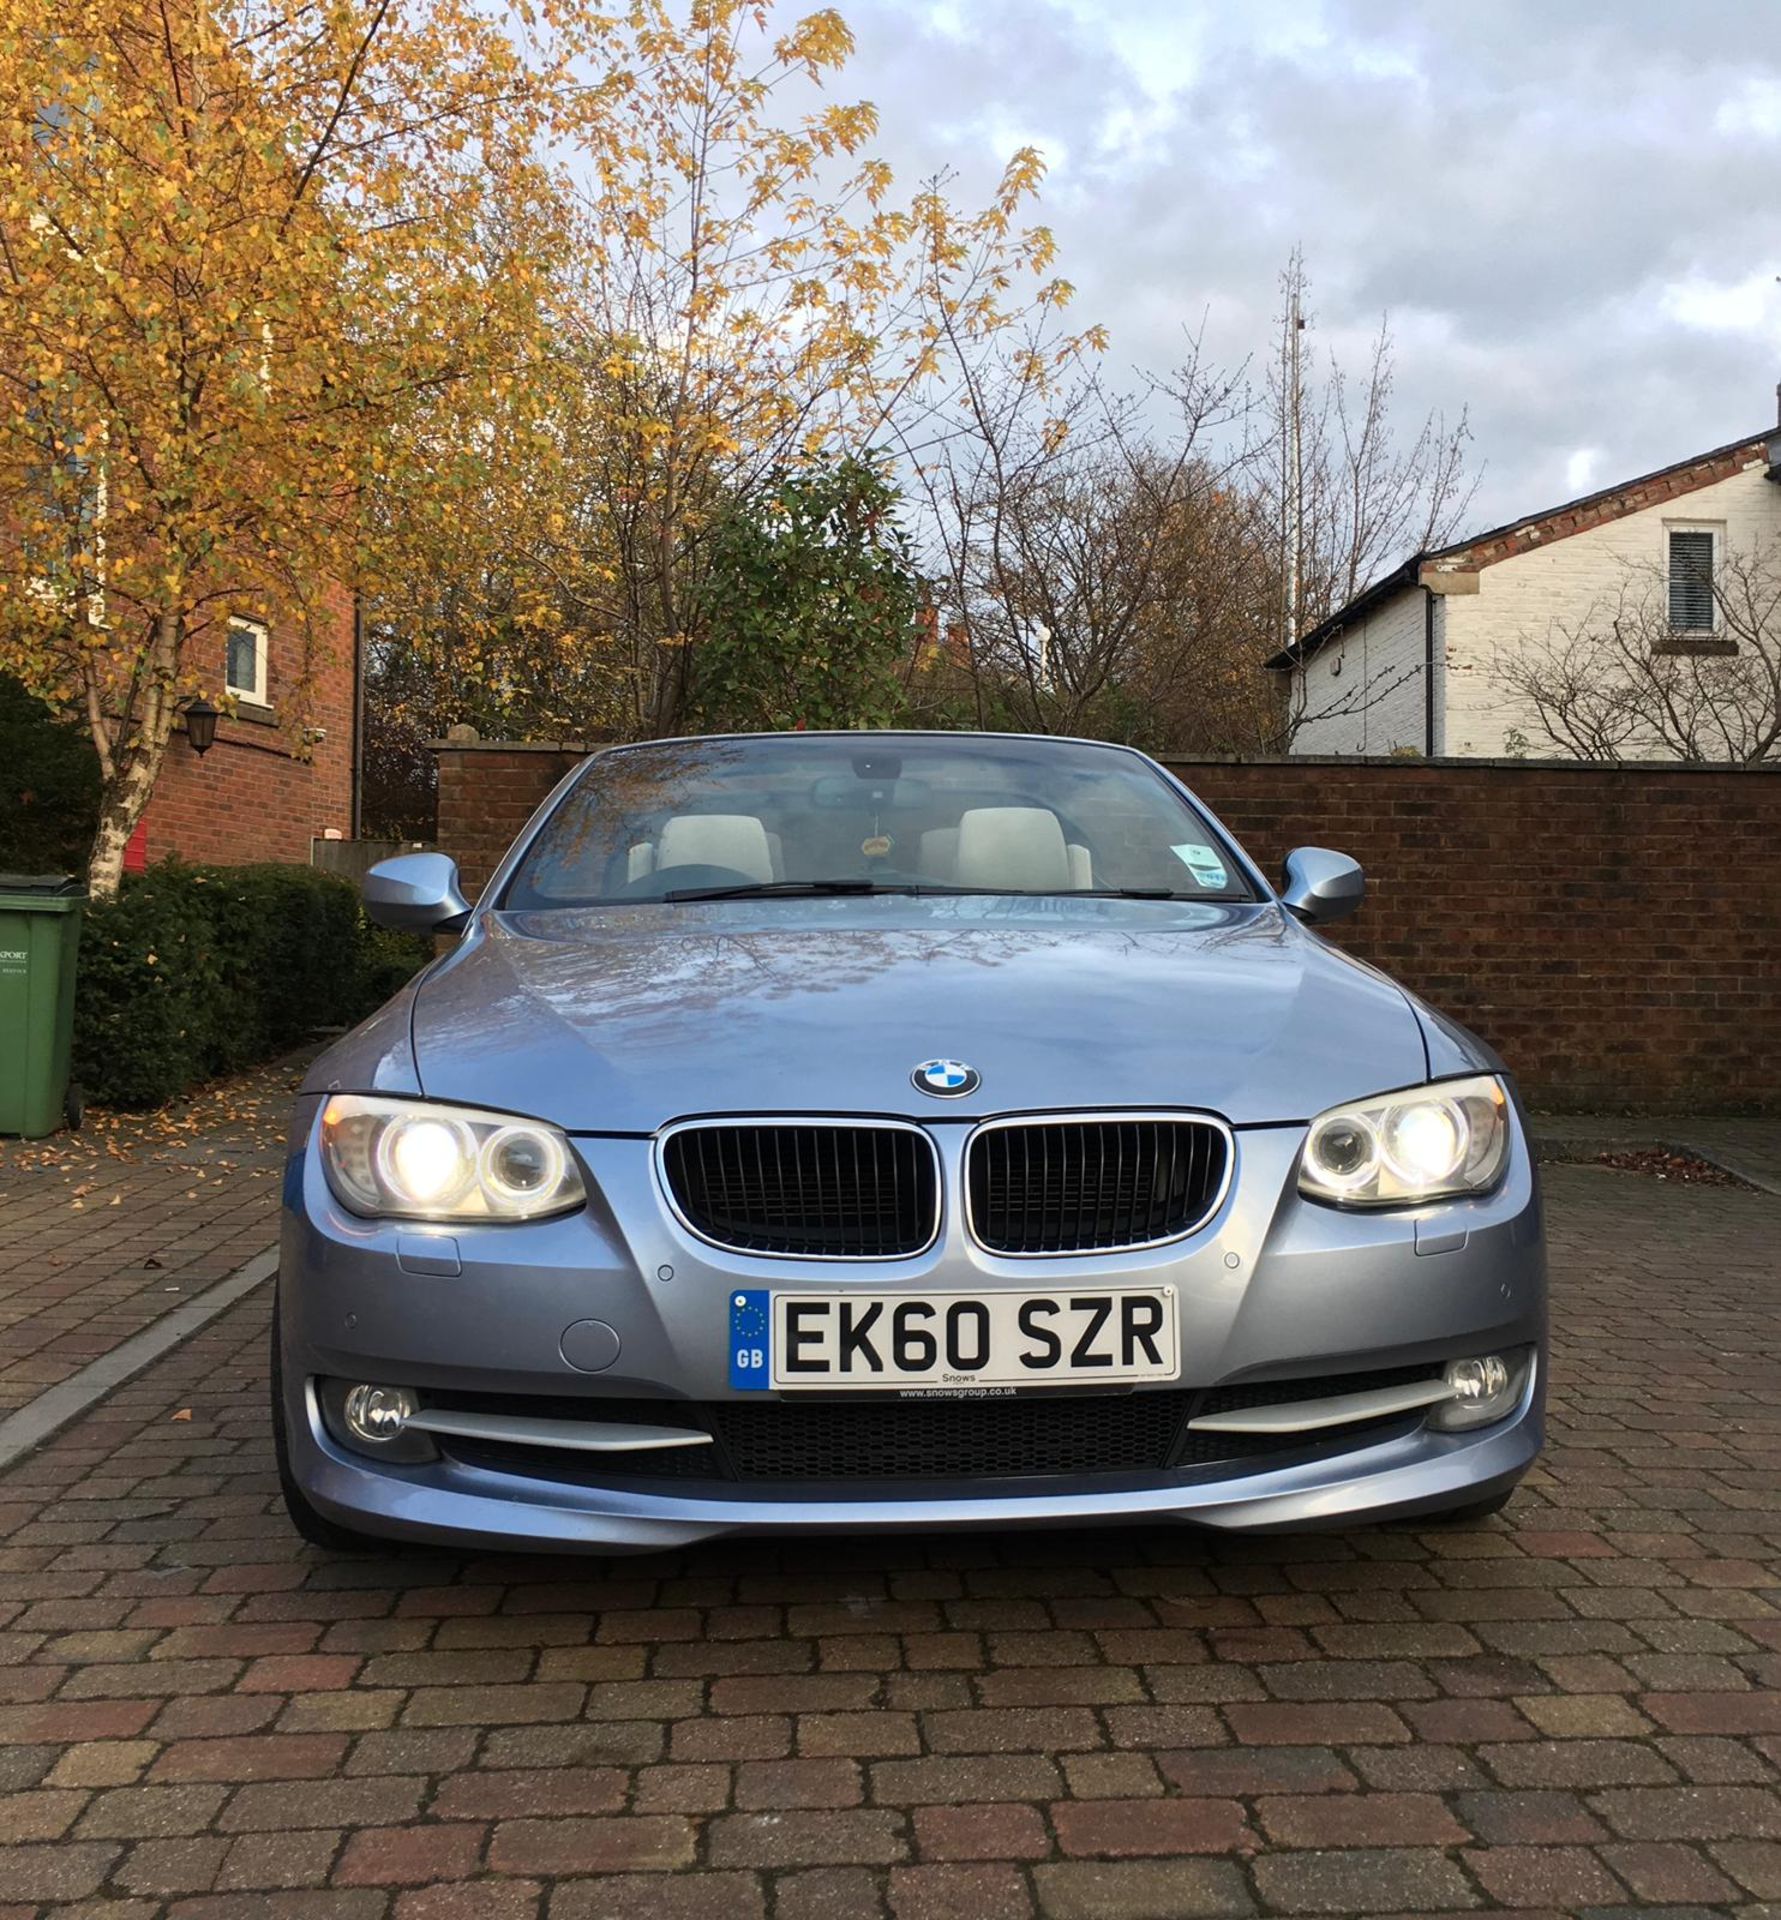 2010/60 REG BMW 320D SE AUTO 181 2.0 DIESEL BLUE CONVERTIBLE, SHOWING 3 FORMER KEEPERS *NO VAT* - Image 2 of 16